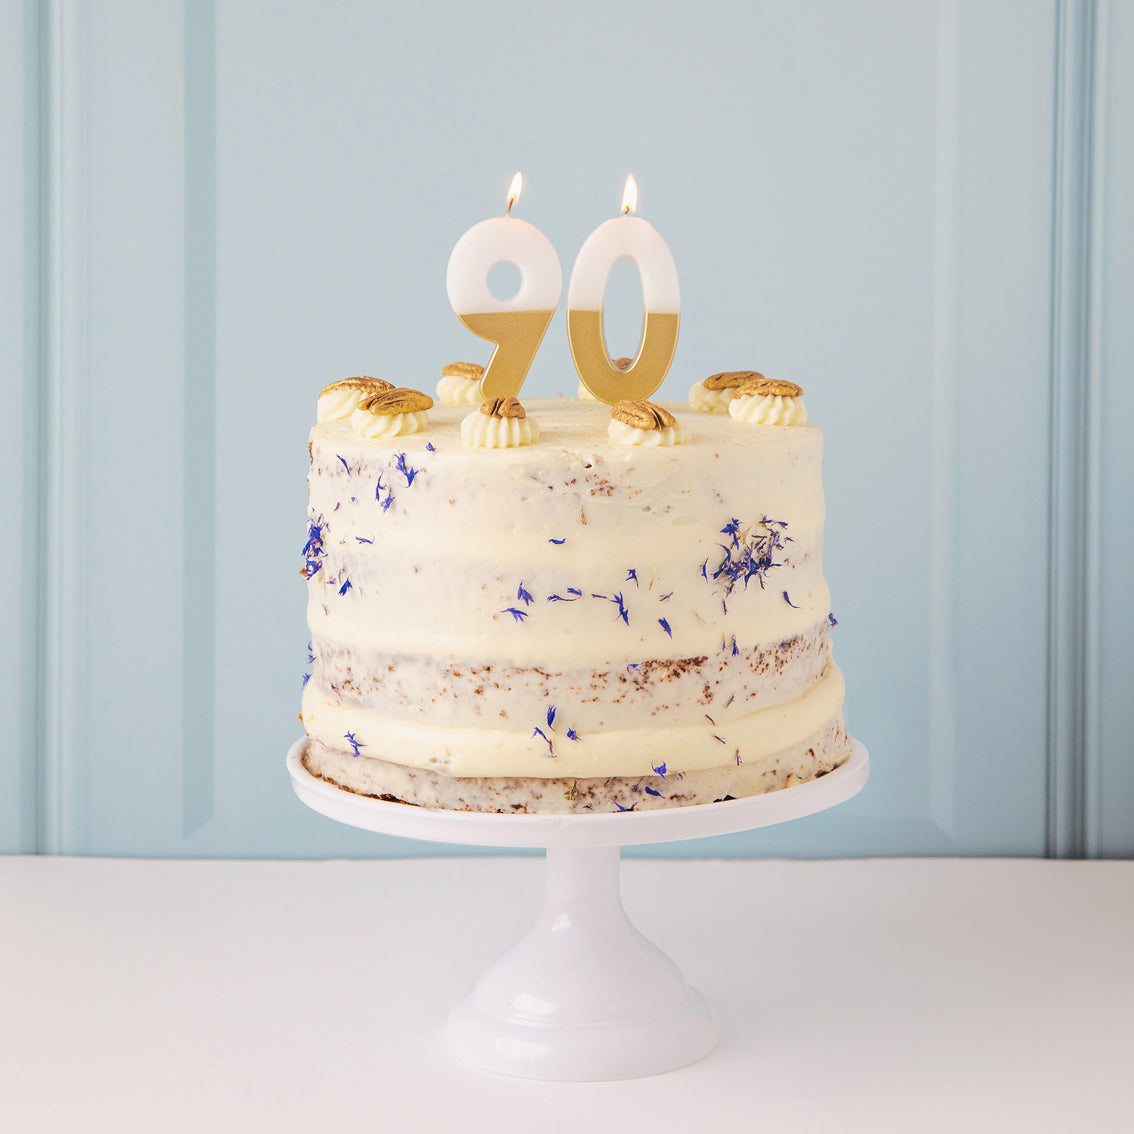 Gold &amp; White Number Candle by talking tables at penny black - 90 on top of a naked cake on a cake stand.